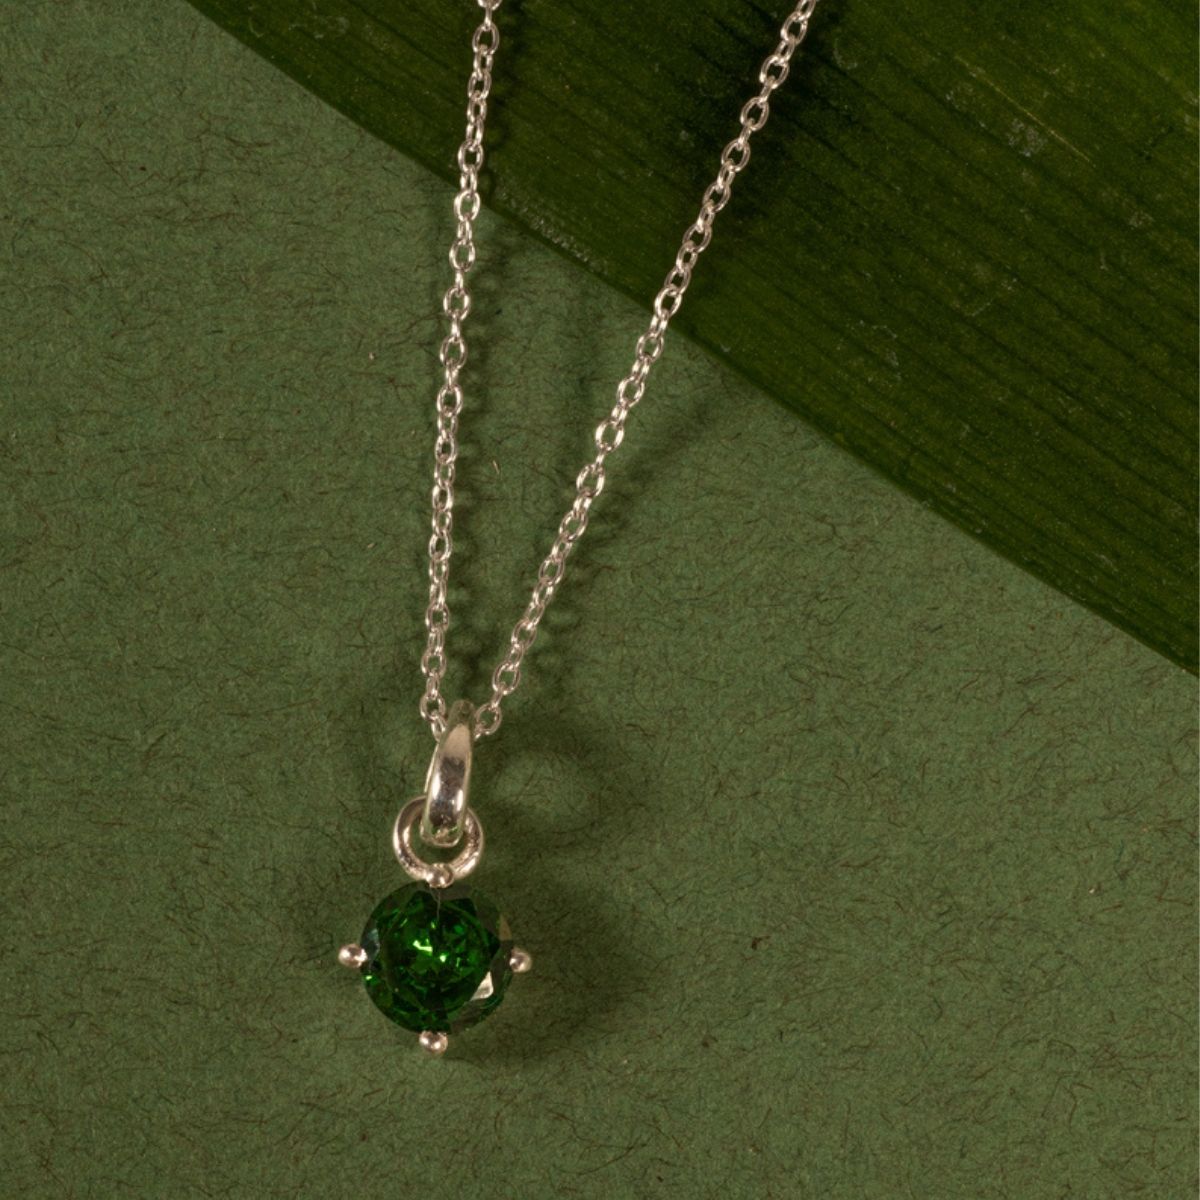 3.0cts Sterling Silver, Natural Emerald Necklace, Dark Green Emerald Pendant ,emerald Cut Necklace,natural Emerald Jewelry May Birthstone - Etsy | Emerald  necklace, Jewelry necklace simple, Emerald jewelry